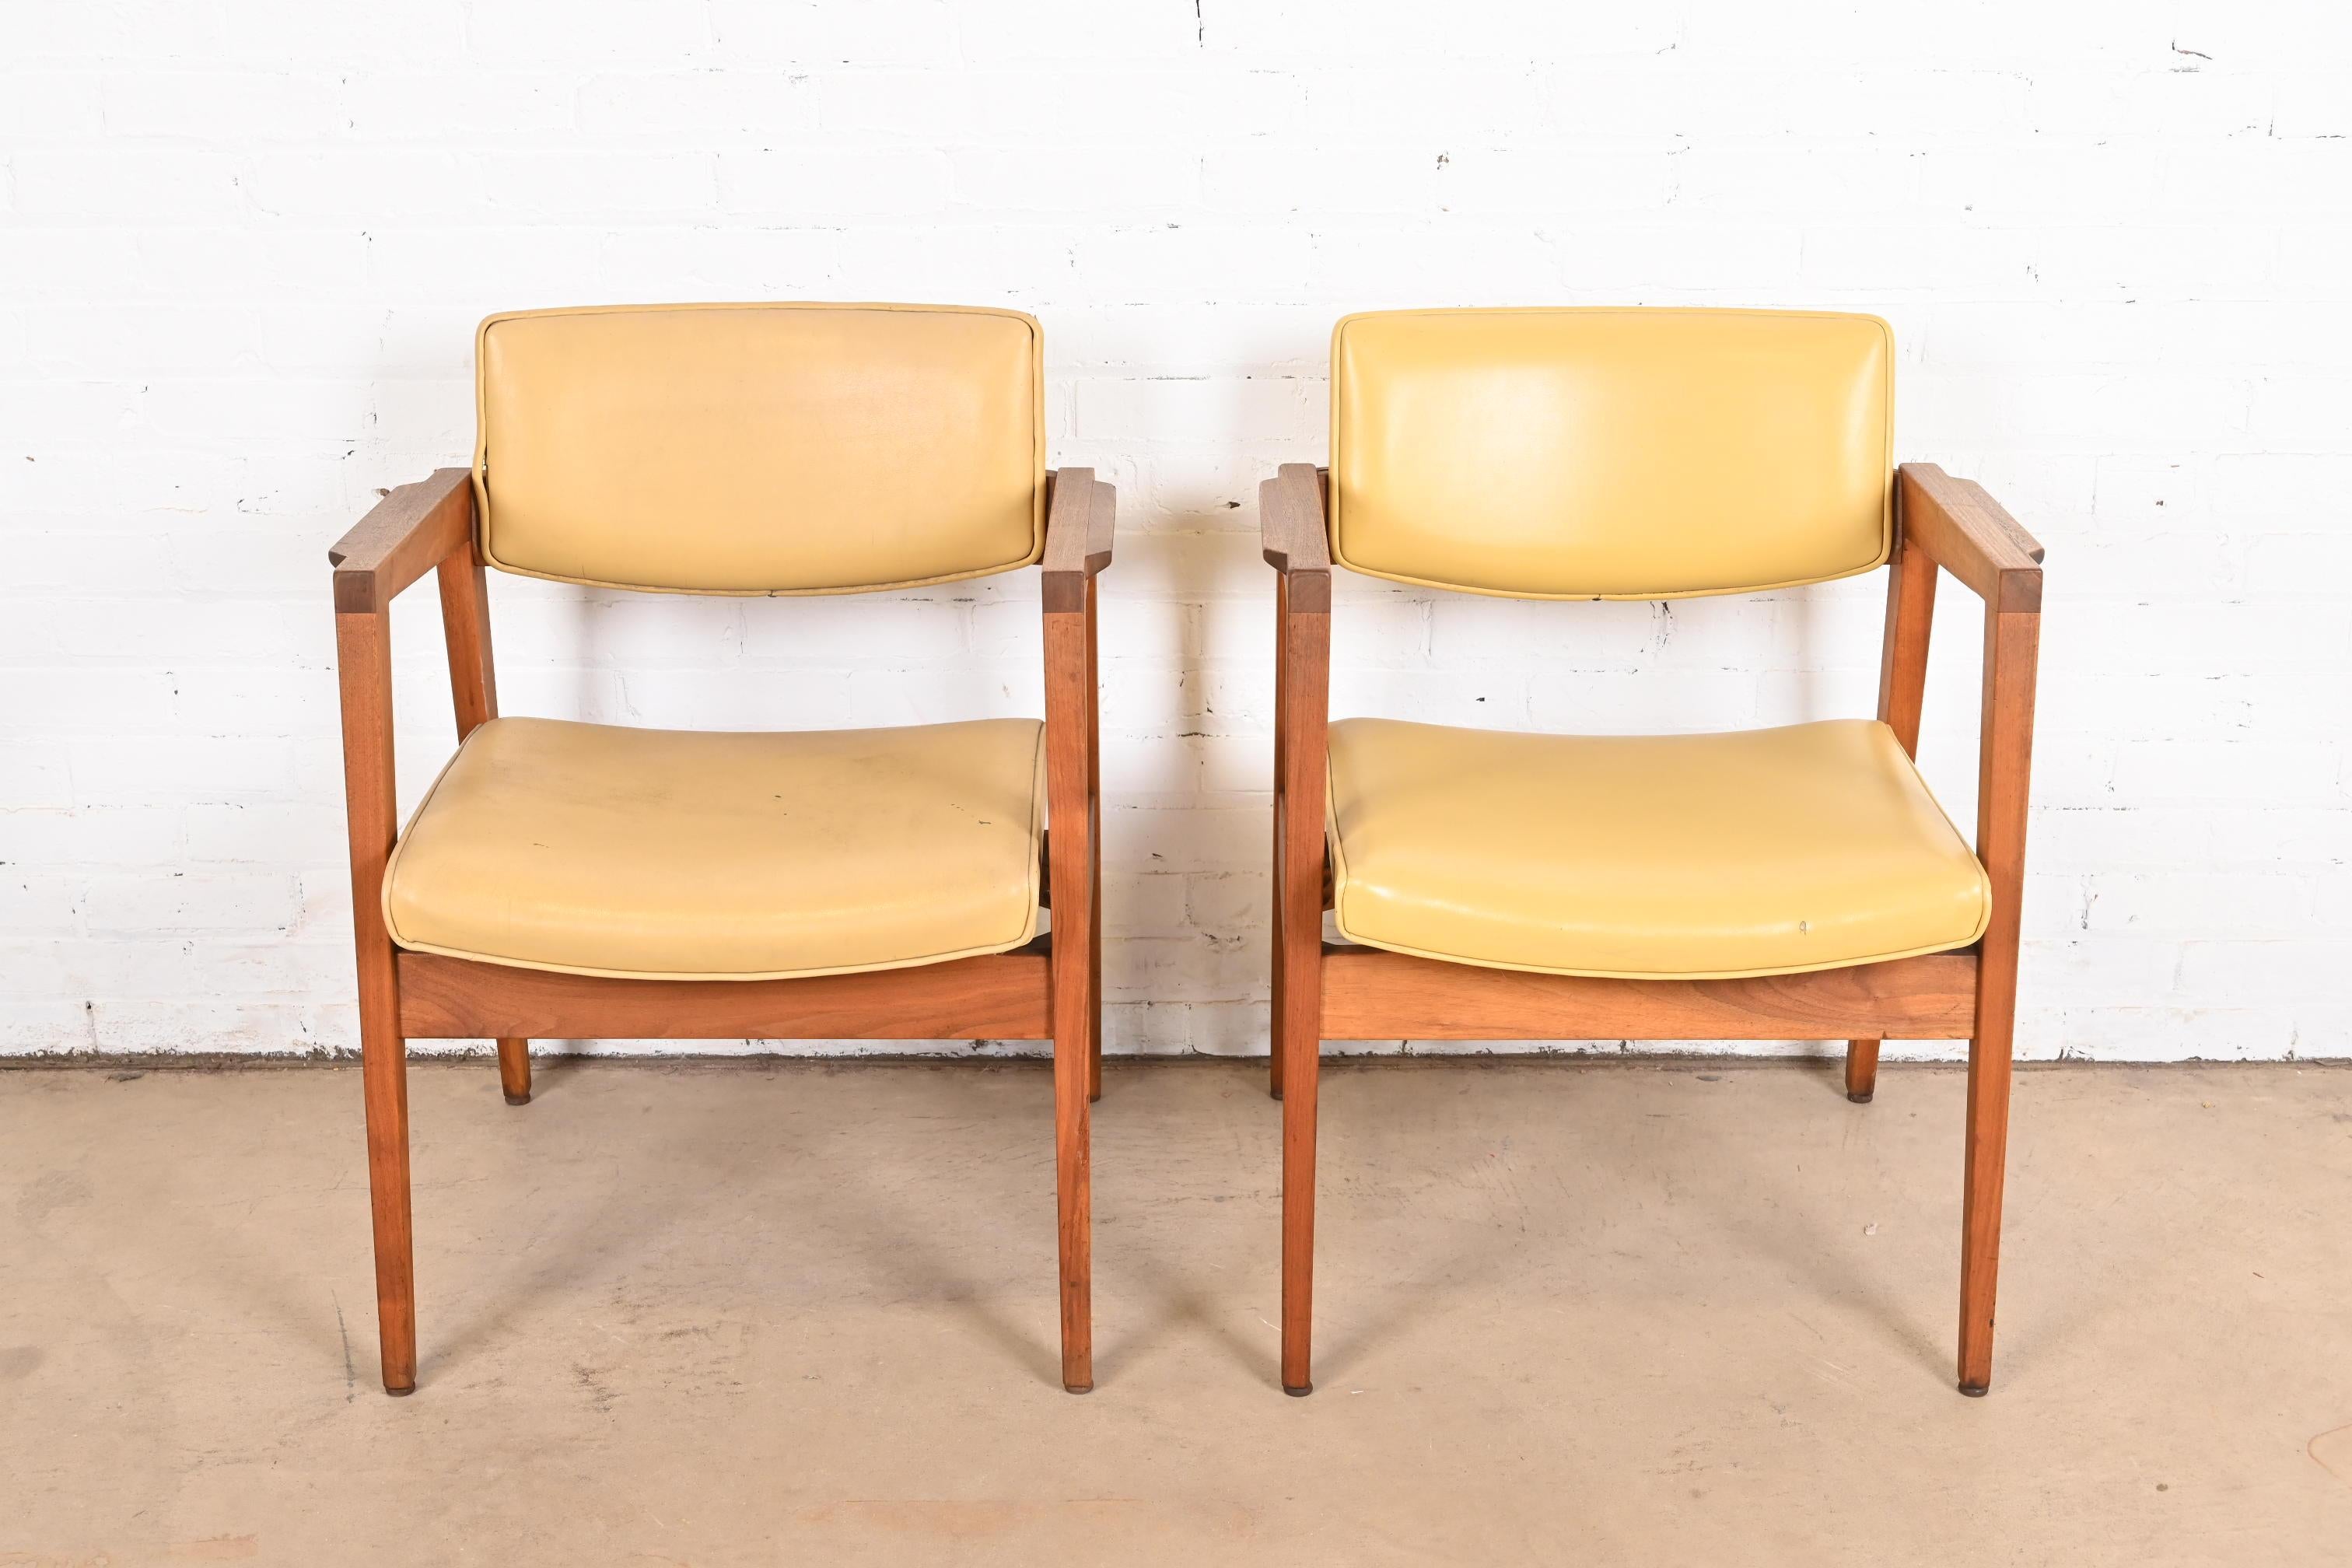 Mid-20th Century Jens Risom Style Mid-Century Modern Solid Walnut Lounge Chairs by Gunlocke, Pair For Sale